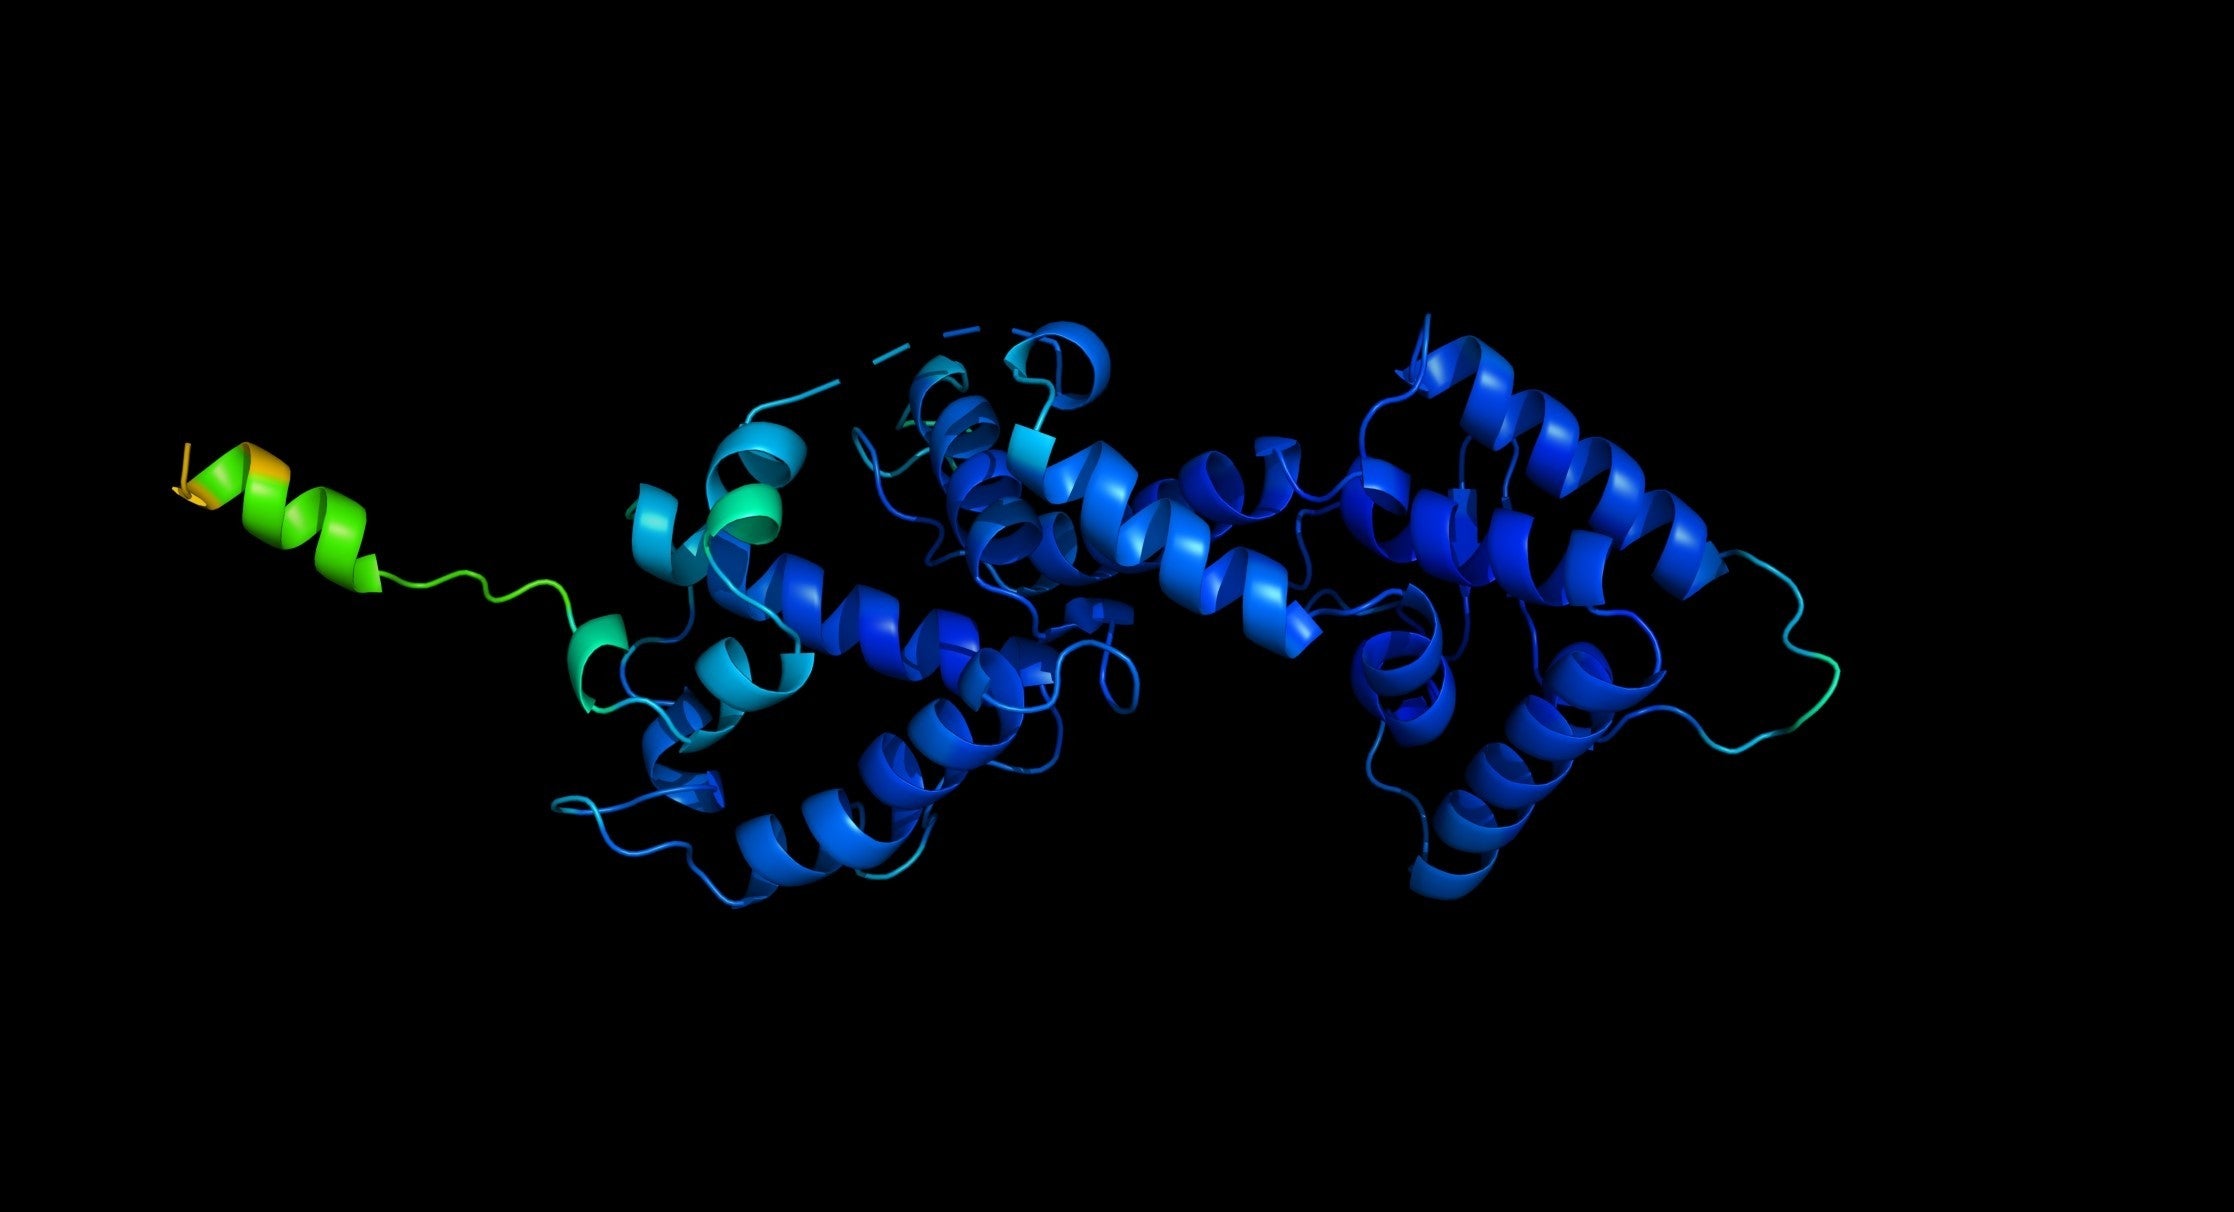 A three-dimensional digital rendering of a protein